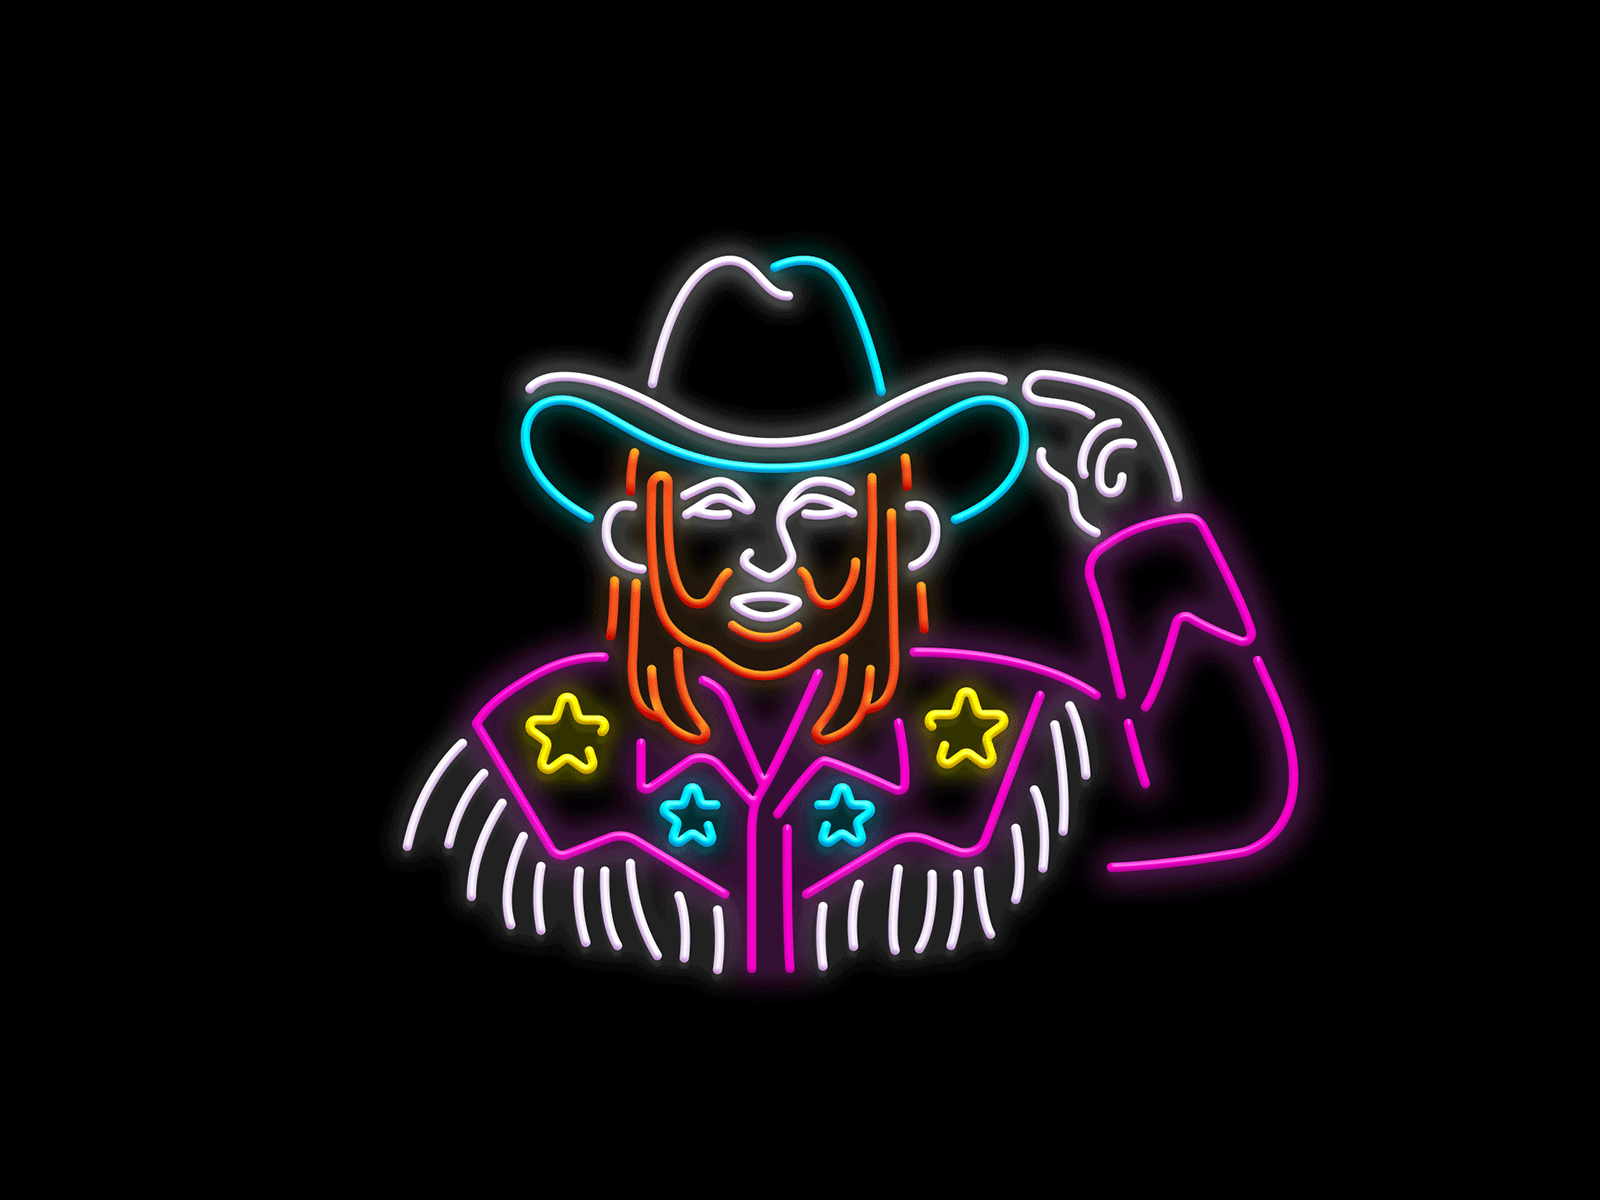 Billy Ray Cyrus Old Town Road Neon by Amy Liu on Dribbble